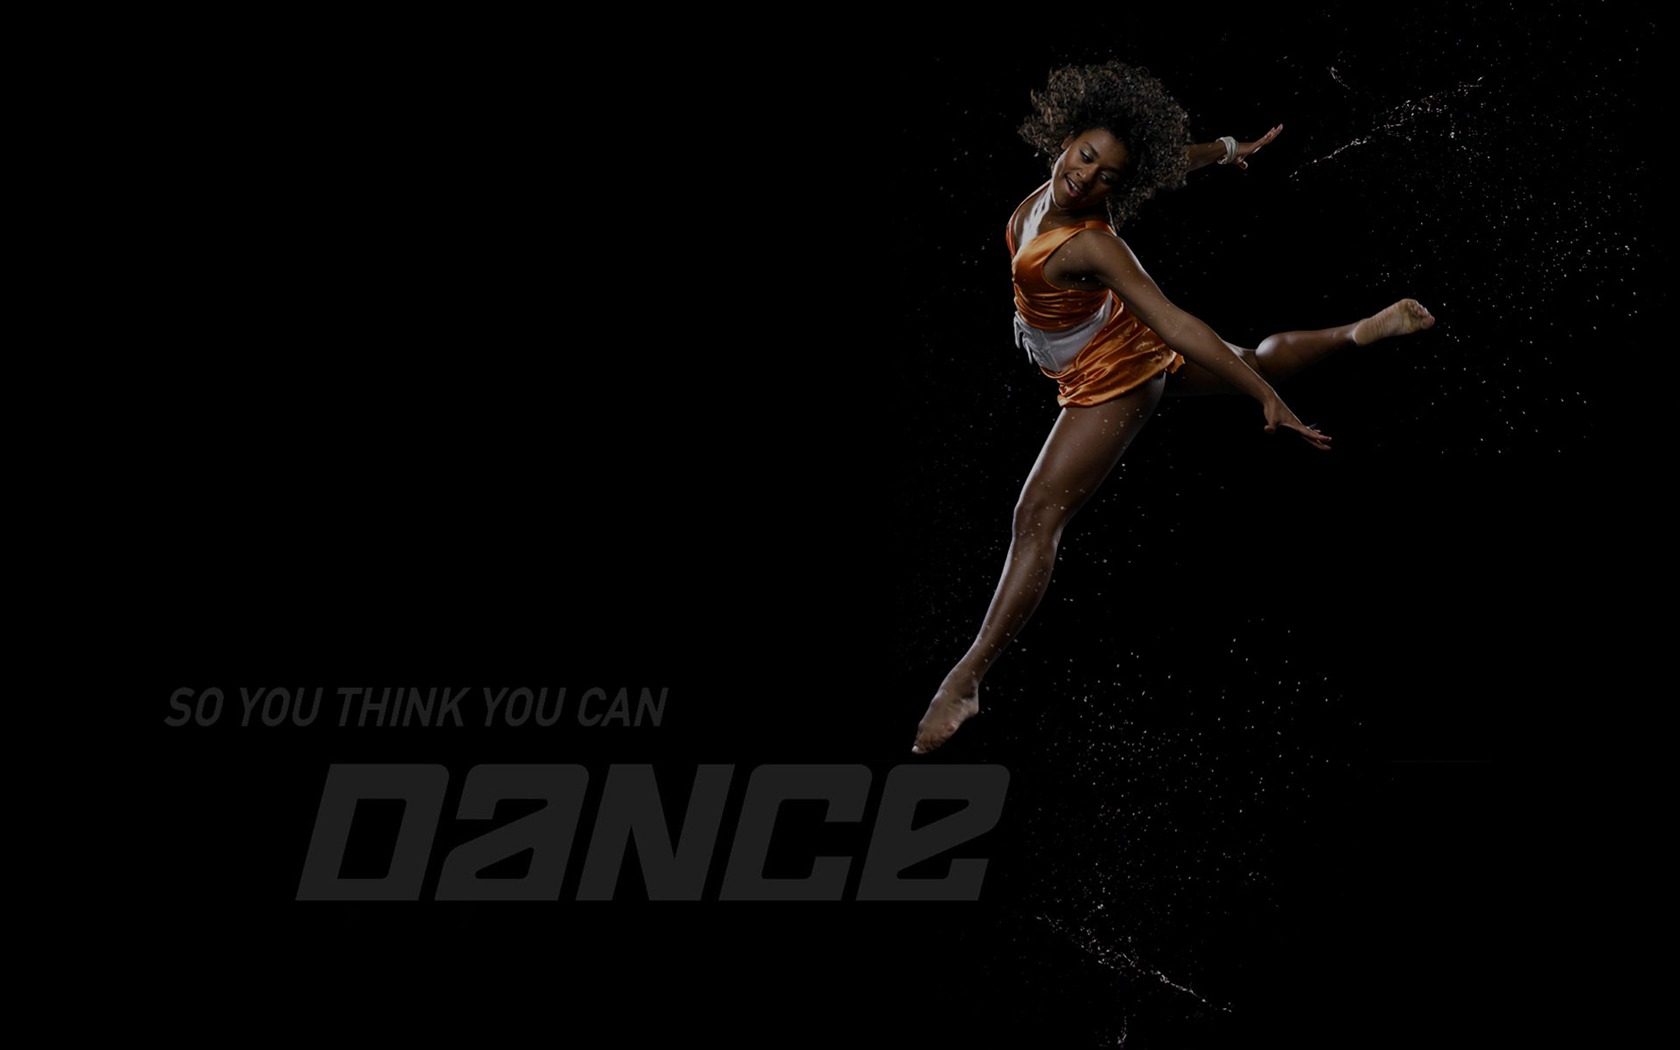 So You Think You Can Dance 舞林争霸 壁纸(二)7 - 1680x1050